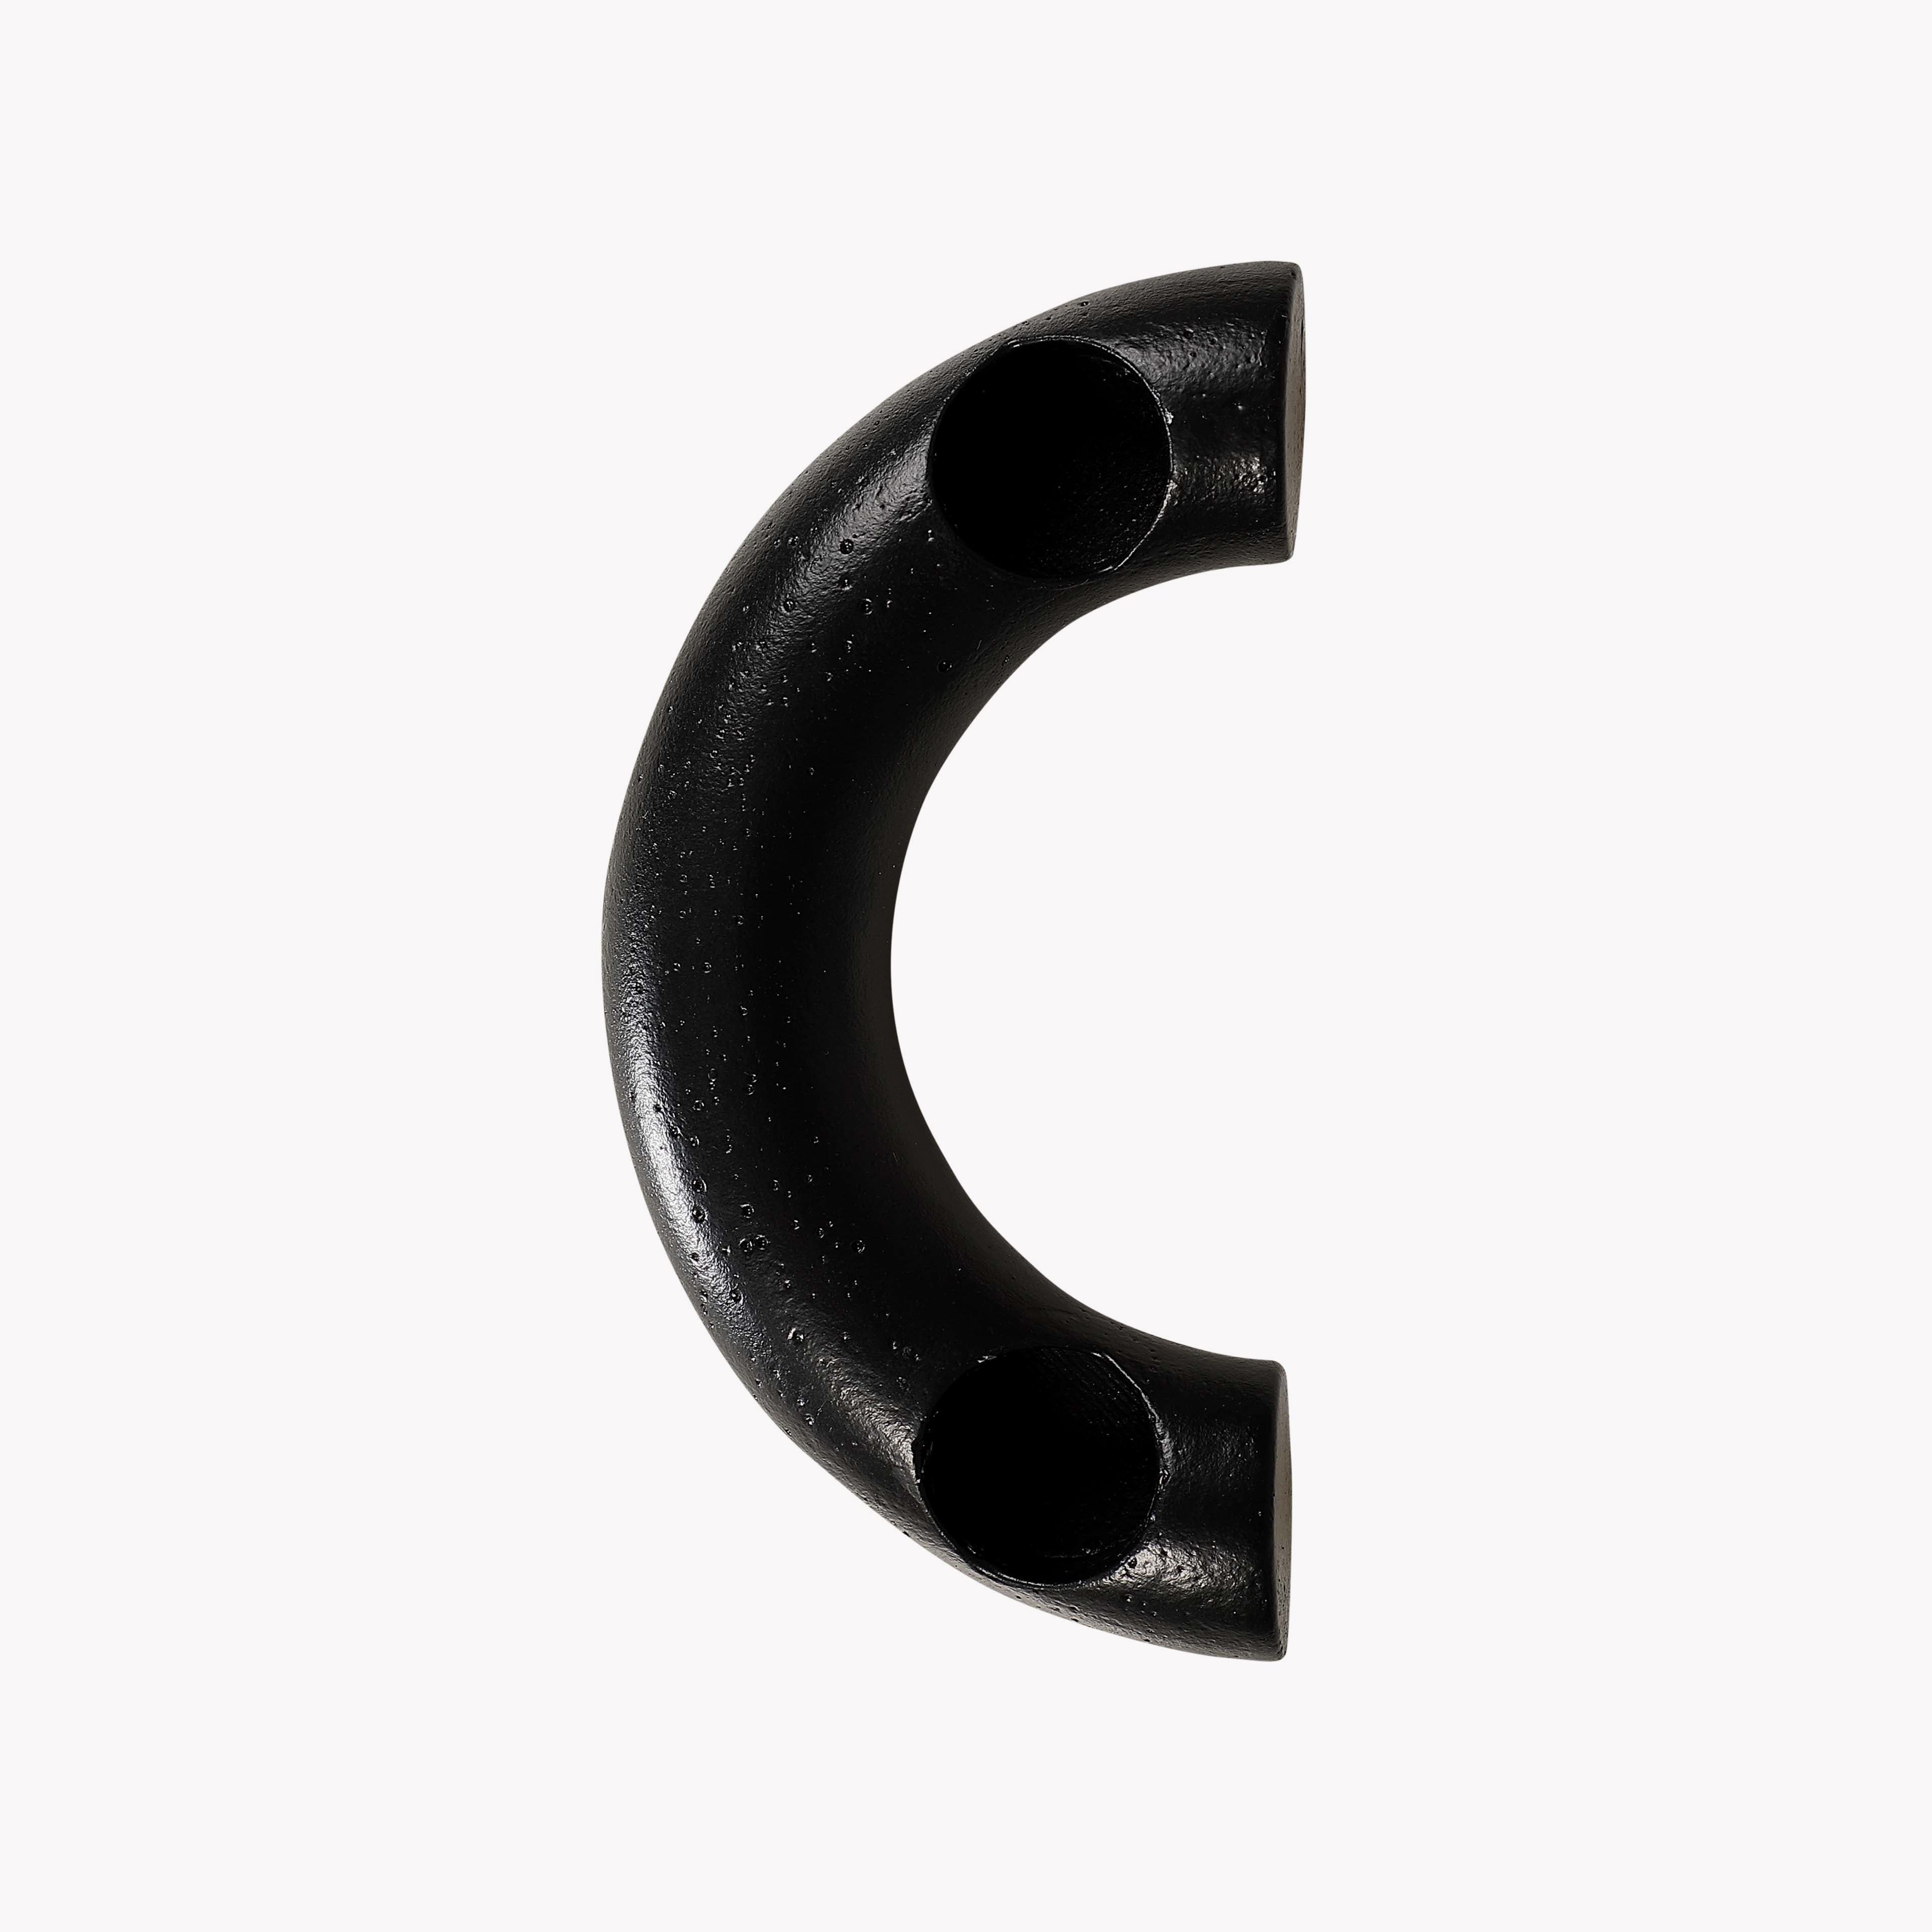 Nordic Style C Shaped Concrete Candle holder-  Black 5.5x3 Inch